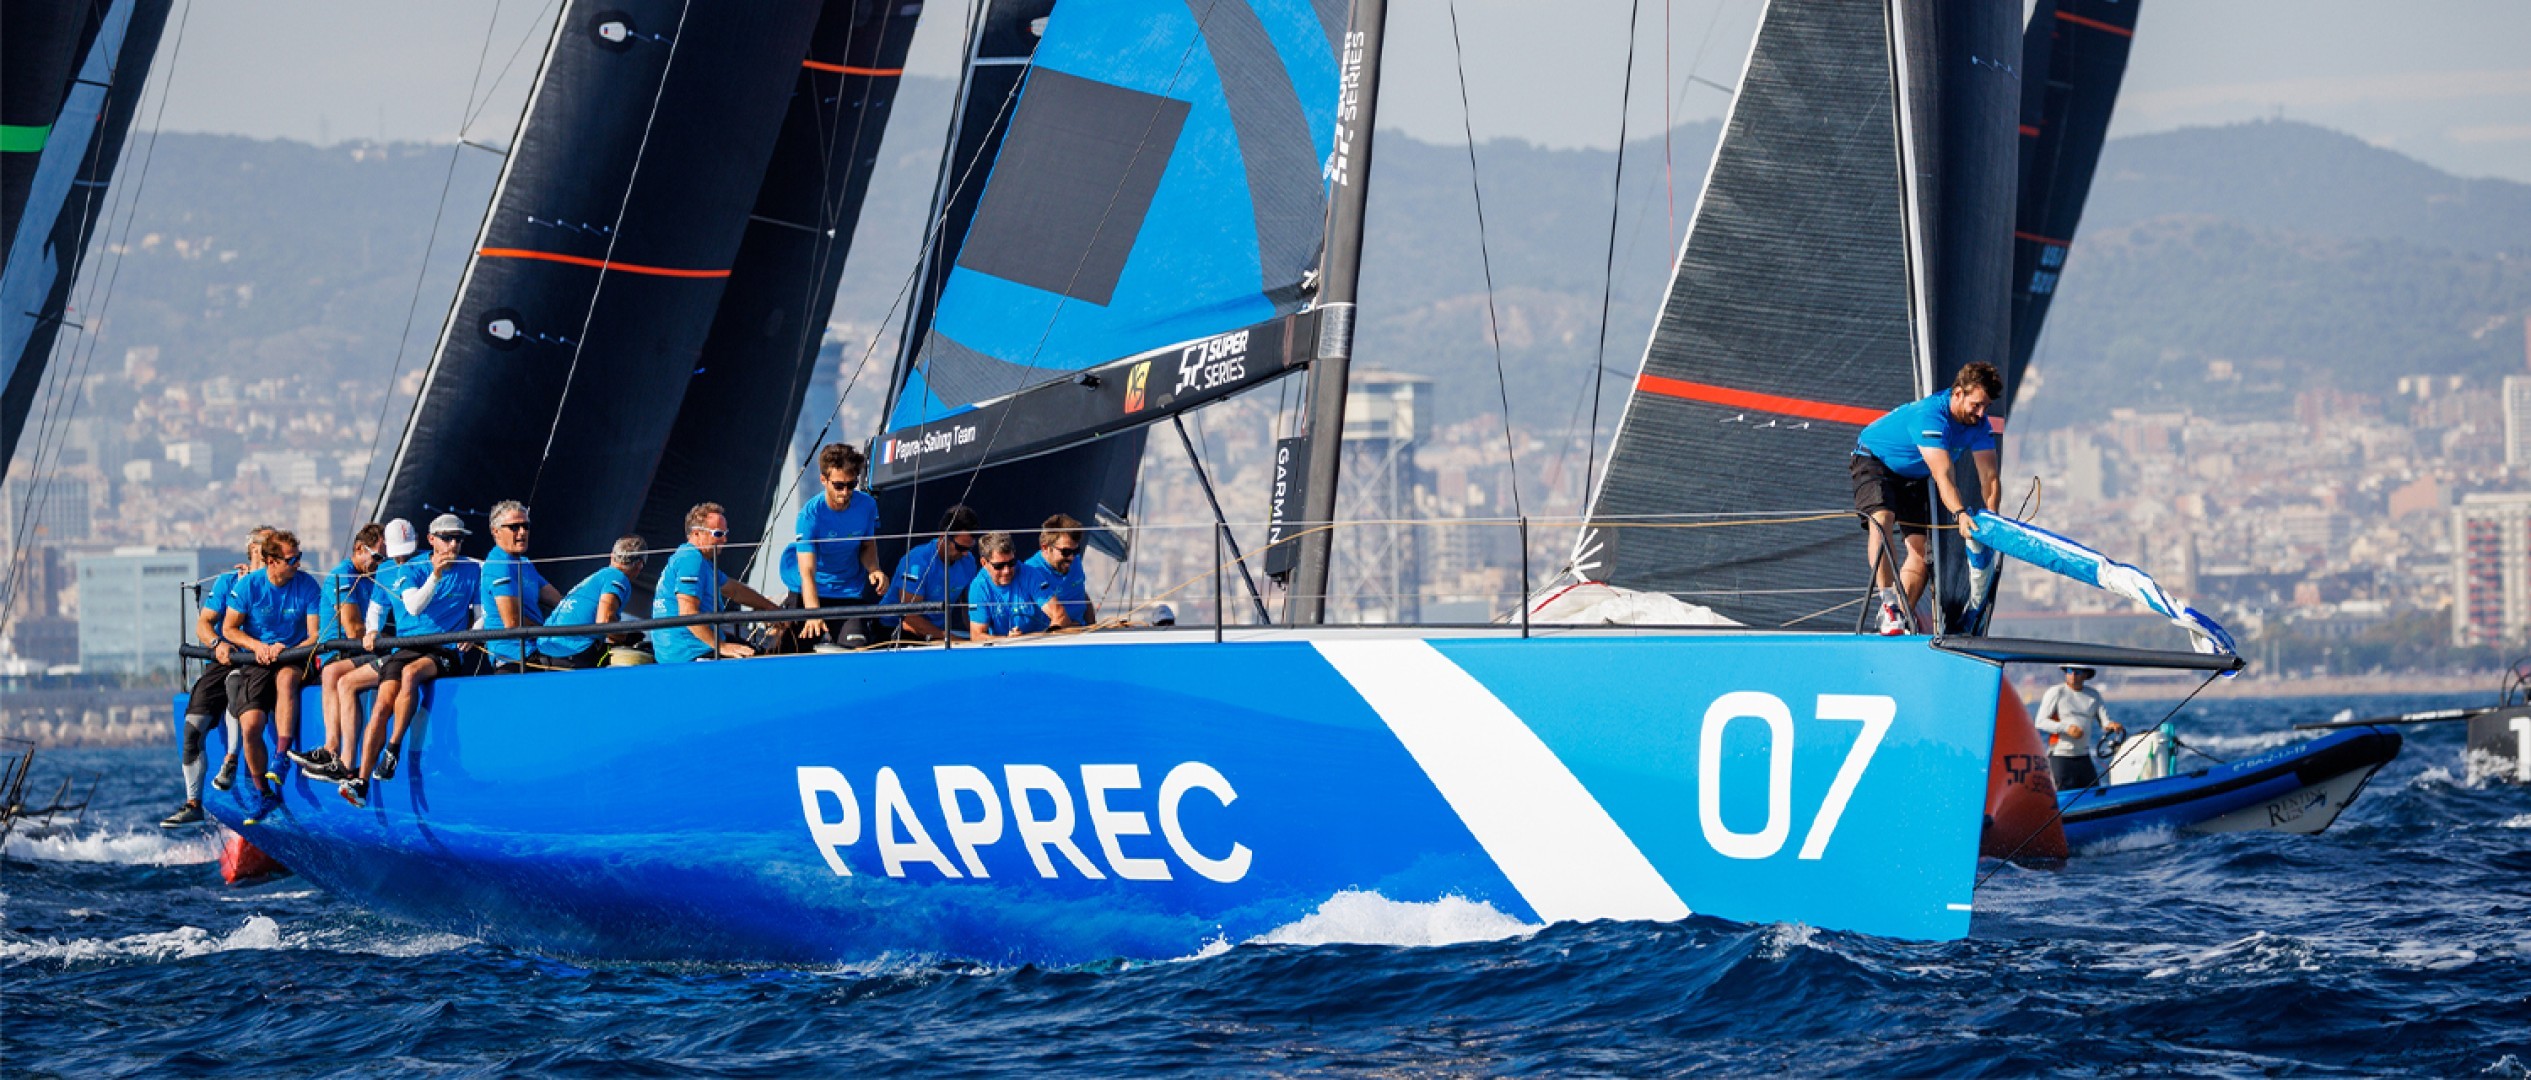 The 52 Super Series heads to Saint Tropez for the first time